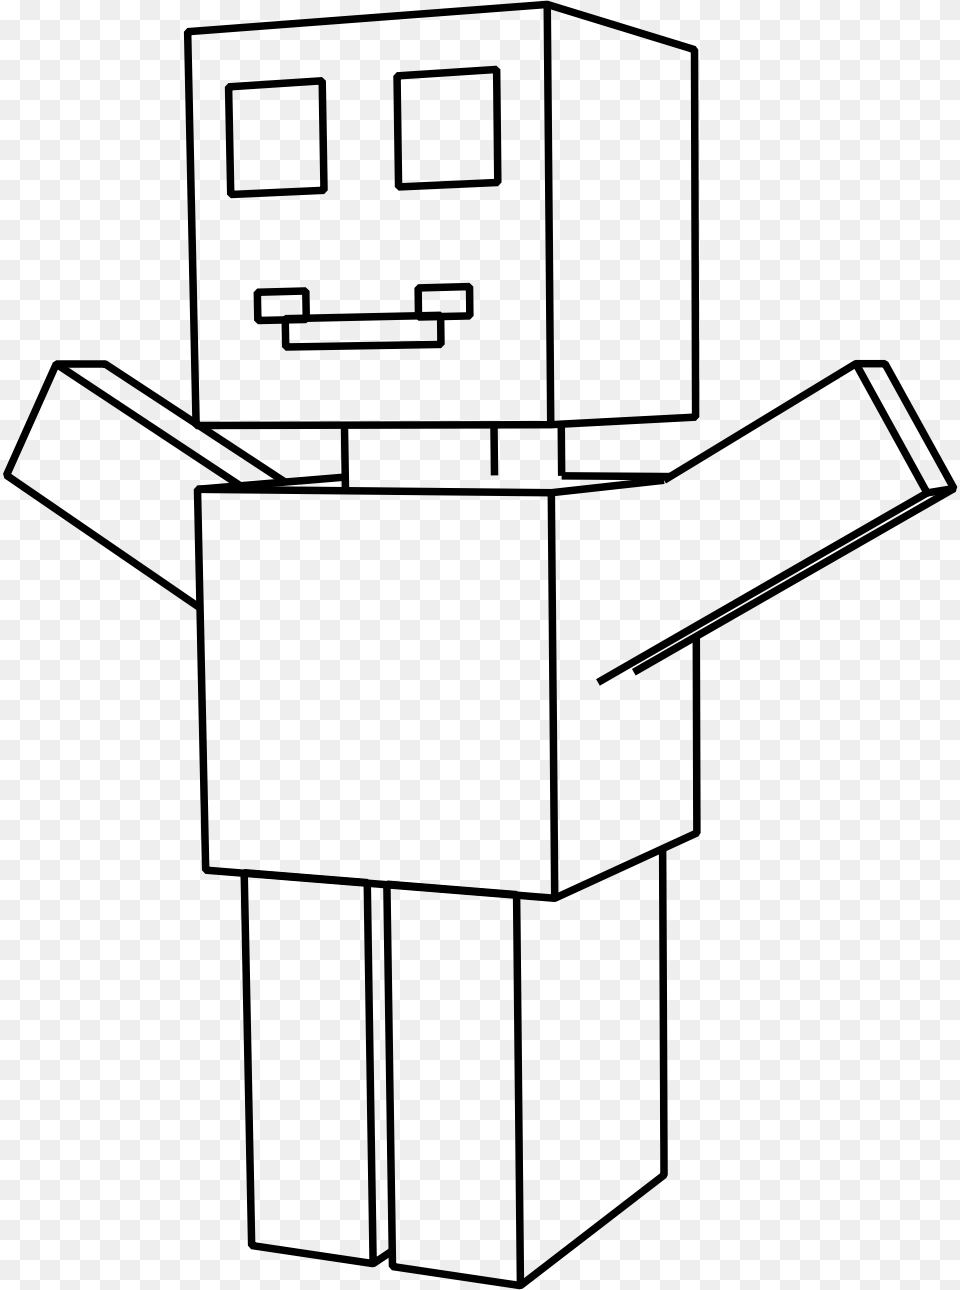 This Icons Design Of Roboman Both Hands Up, Gray Free Transparent Png